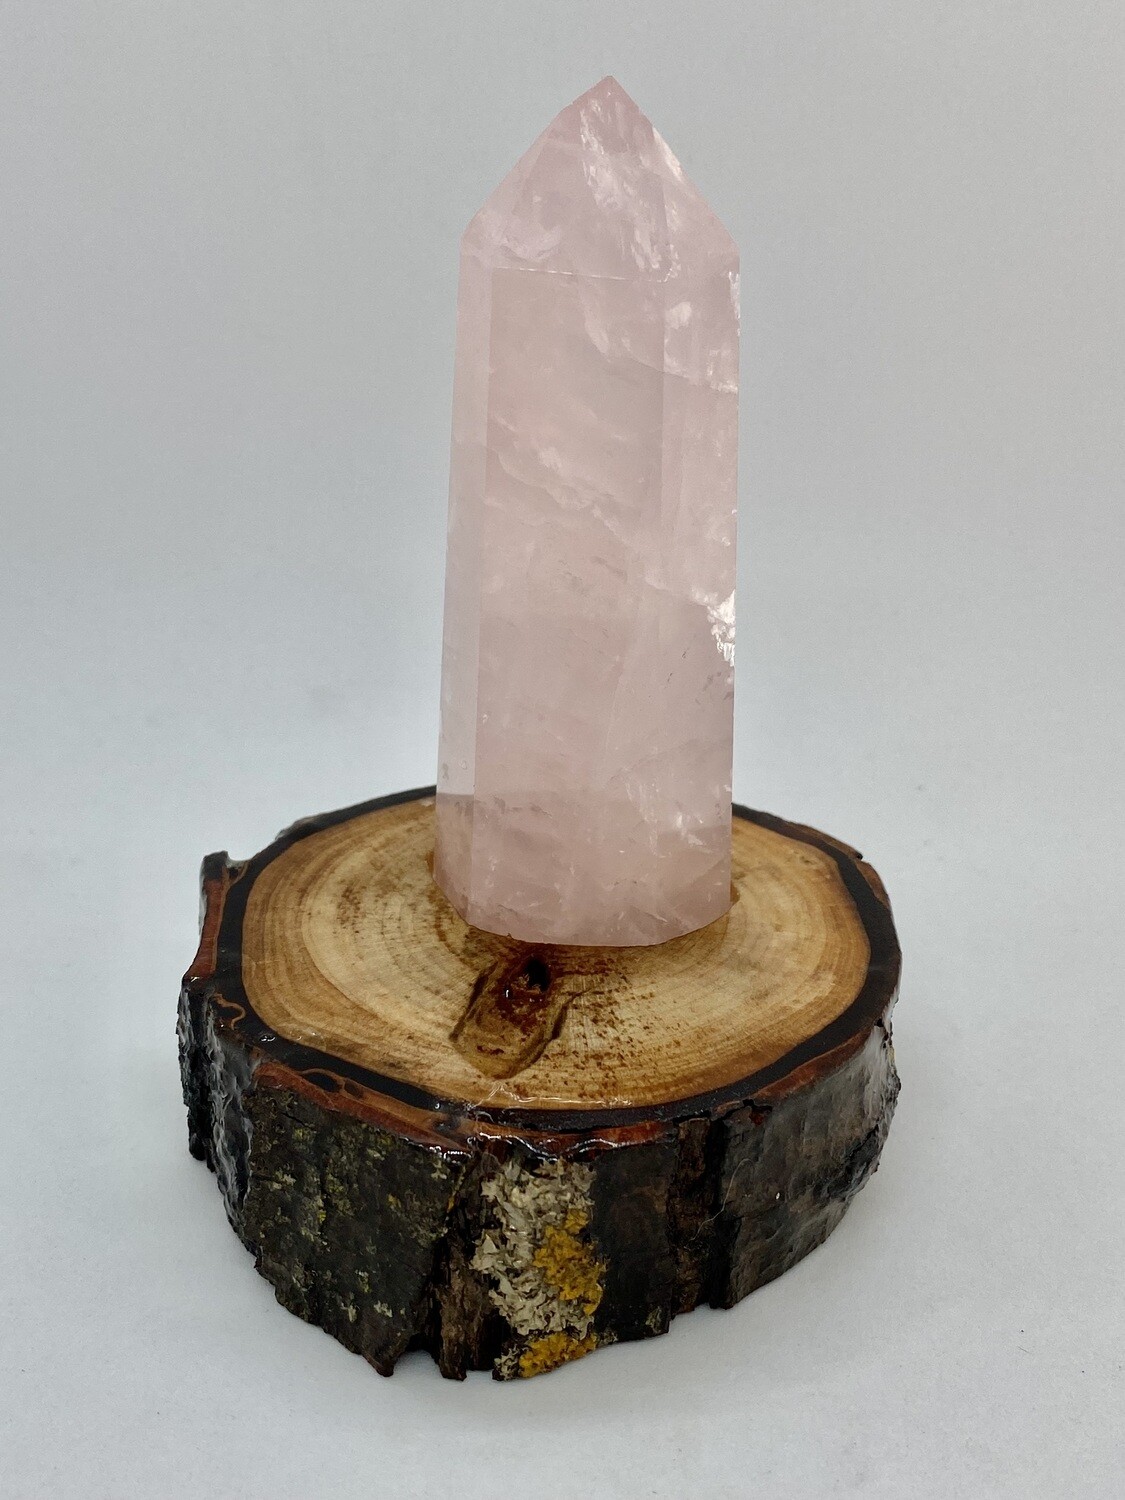 Rose Quartz Tower on a Wooden Stand